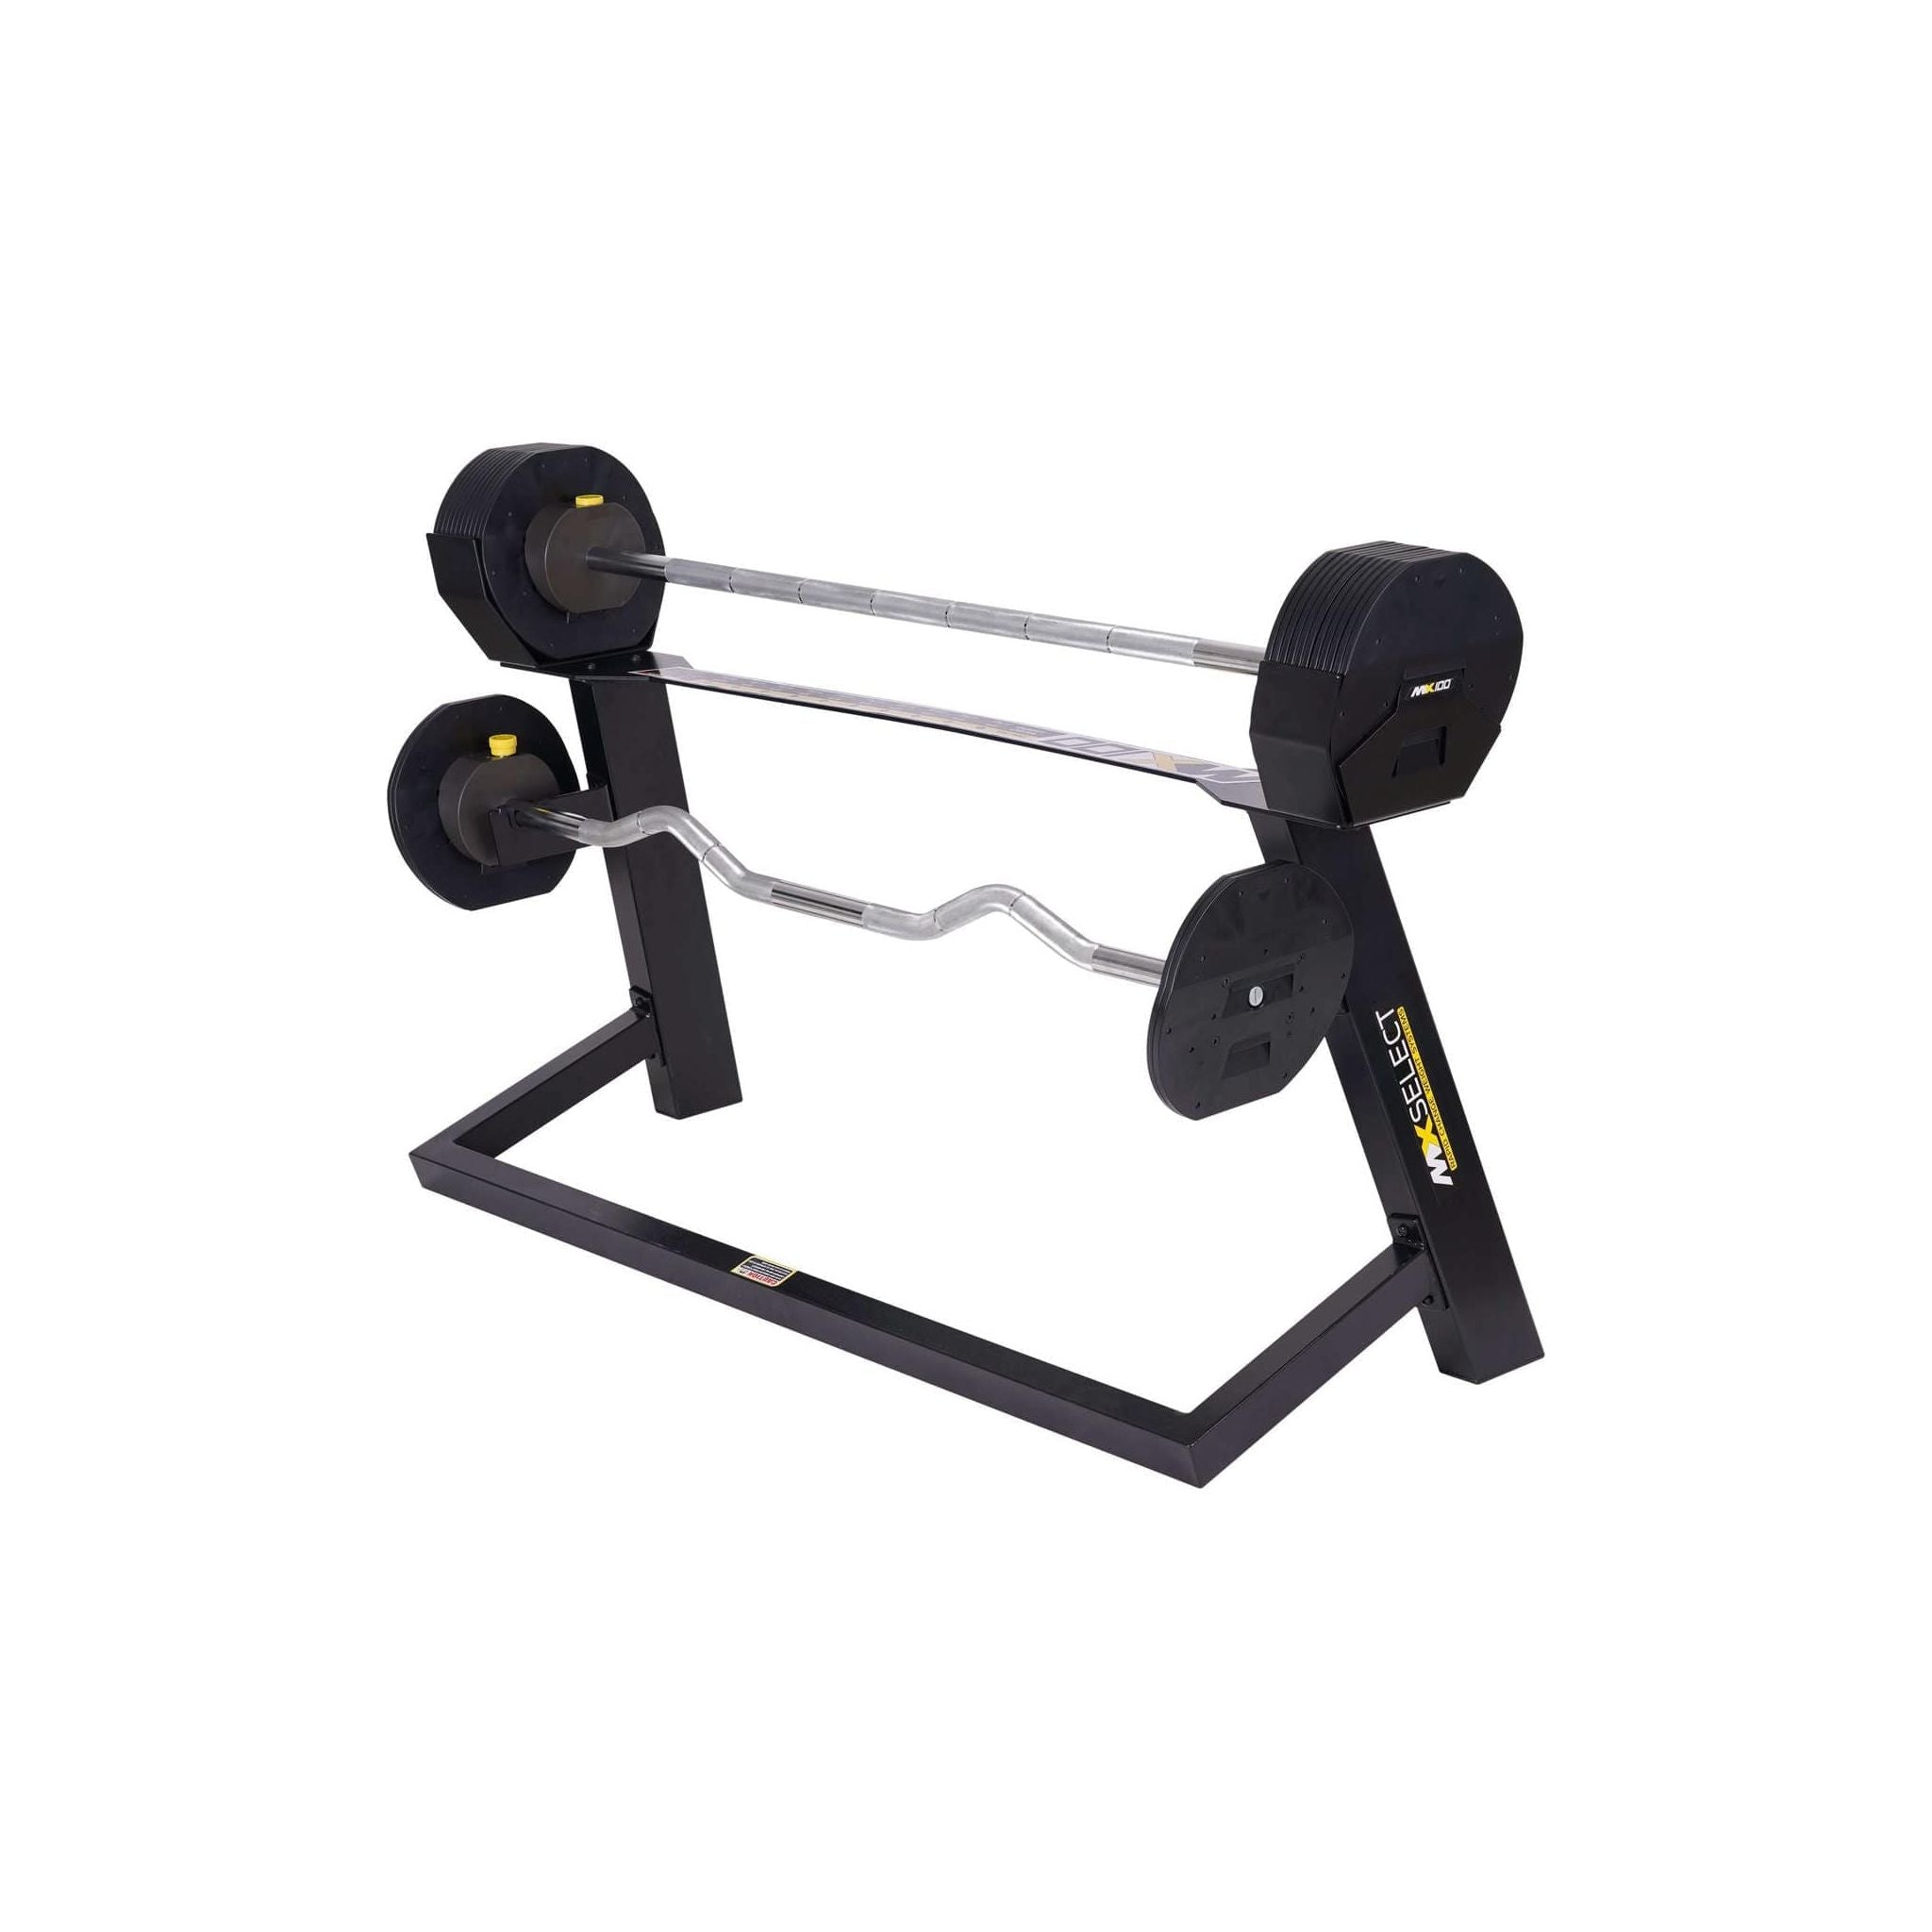 adjustable barbell mx select mx80 rapid change curl bar system how heavy is a curling bar adjustable curl bar mx 100 100lbs 100 lbs 100lb 100 lb adjustable curl bar adjustable bar bell rapid change 